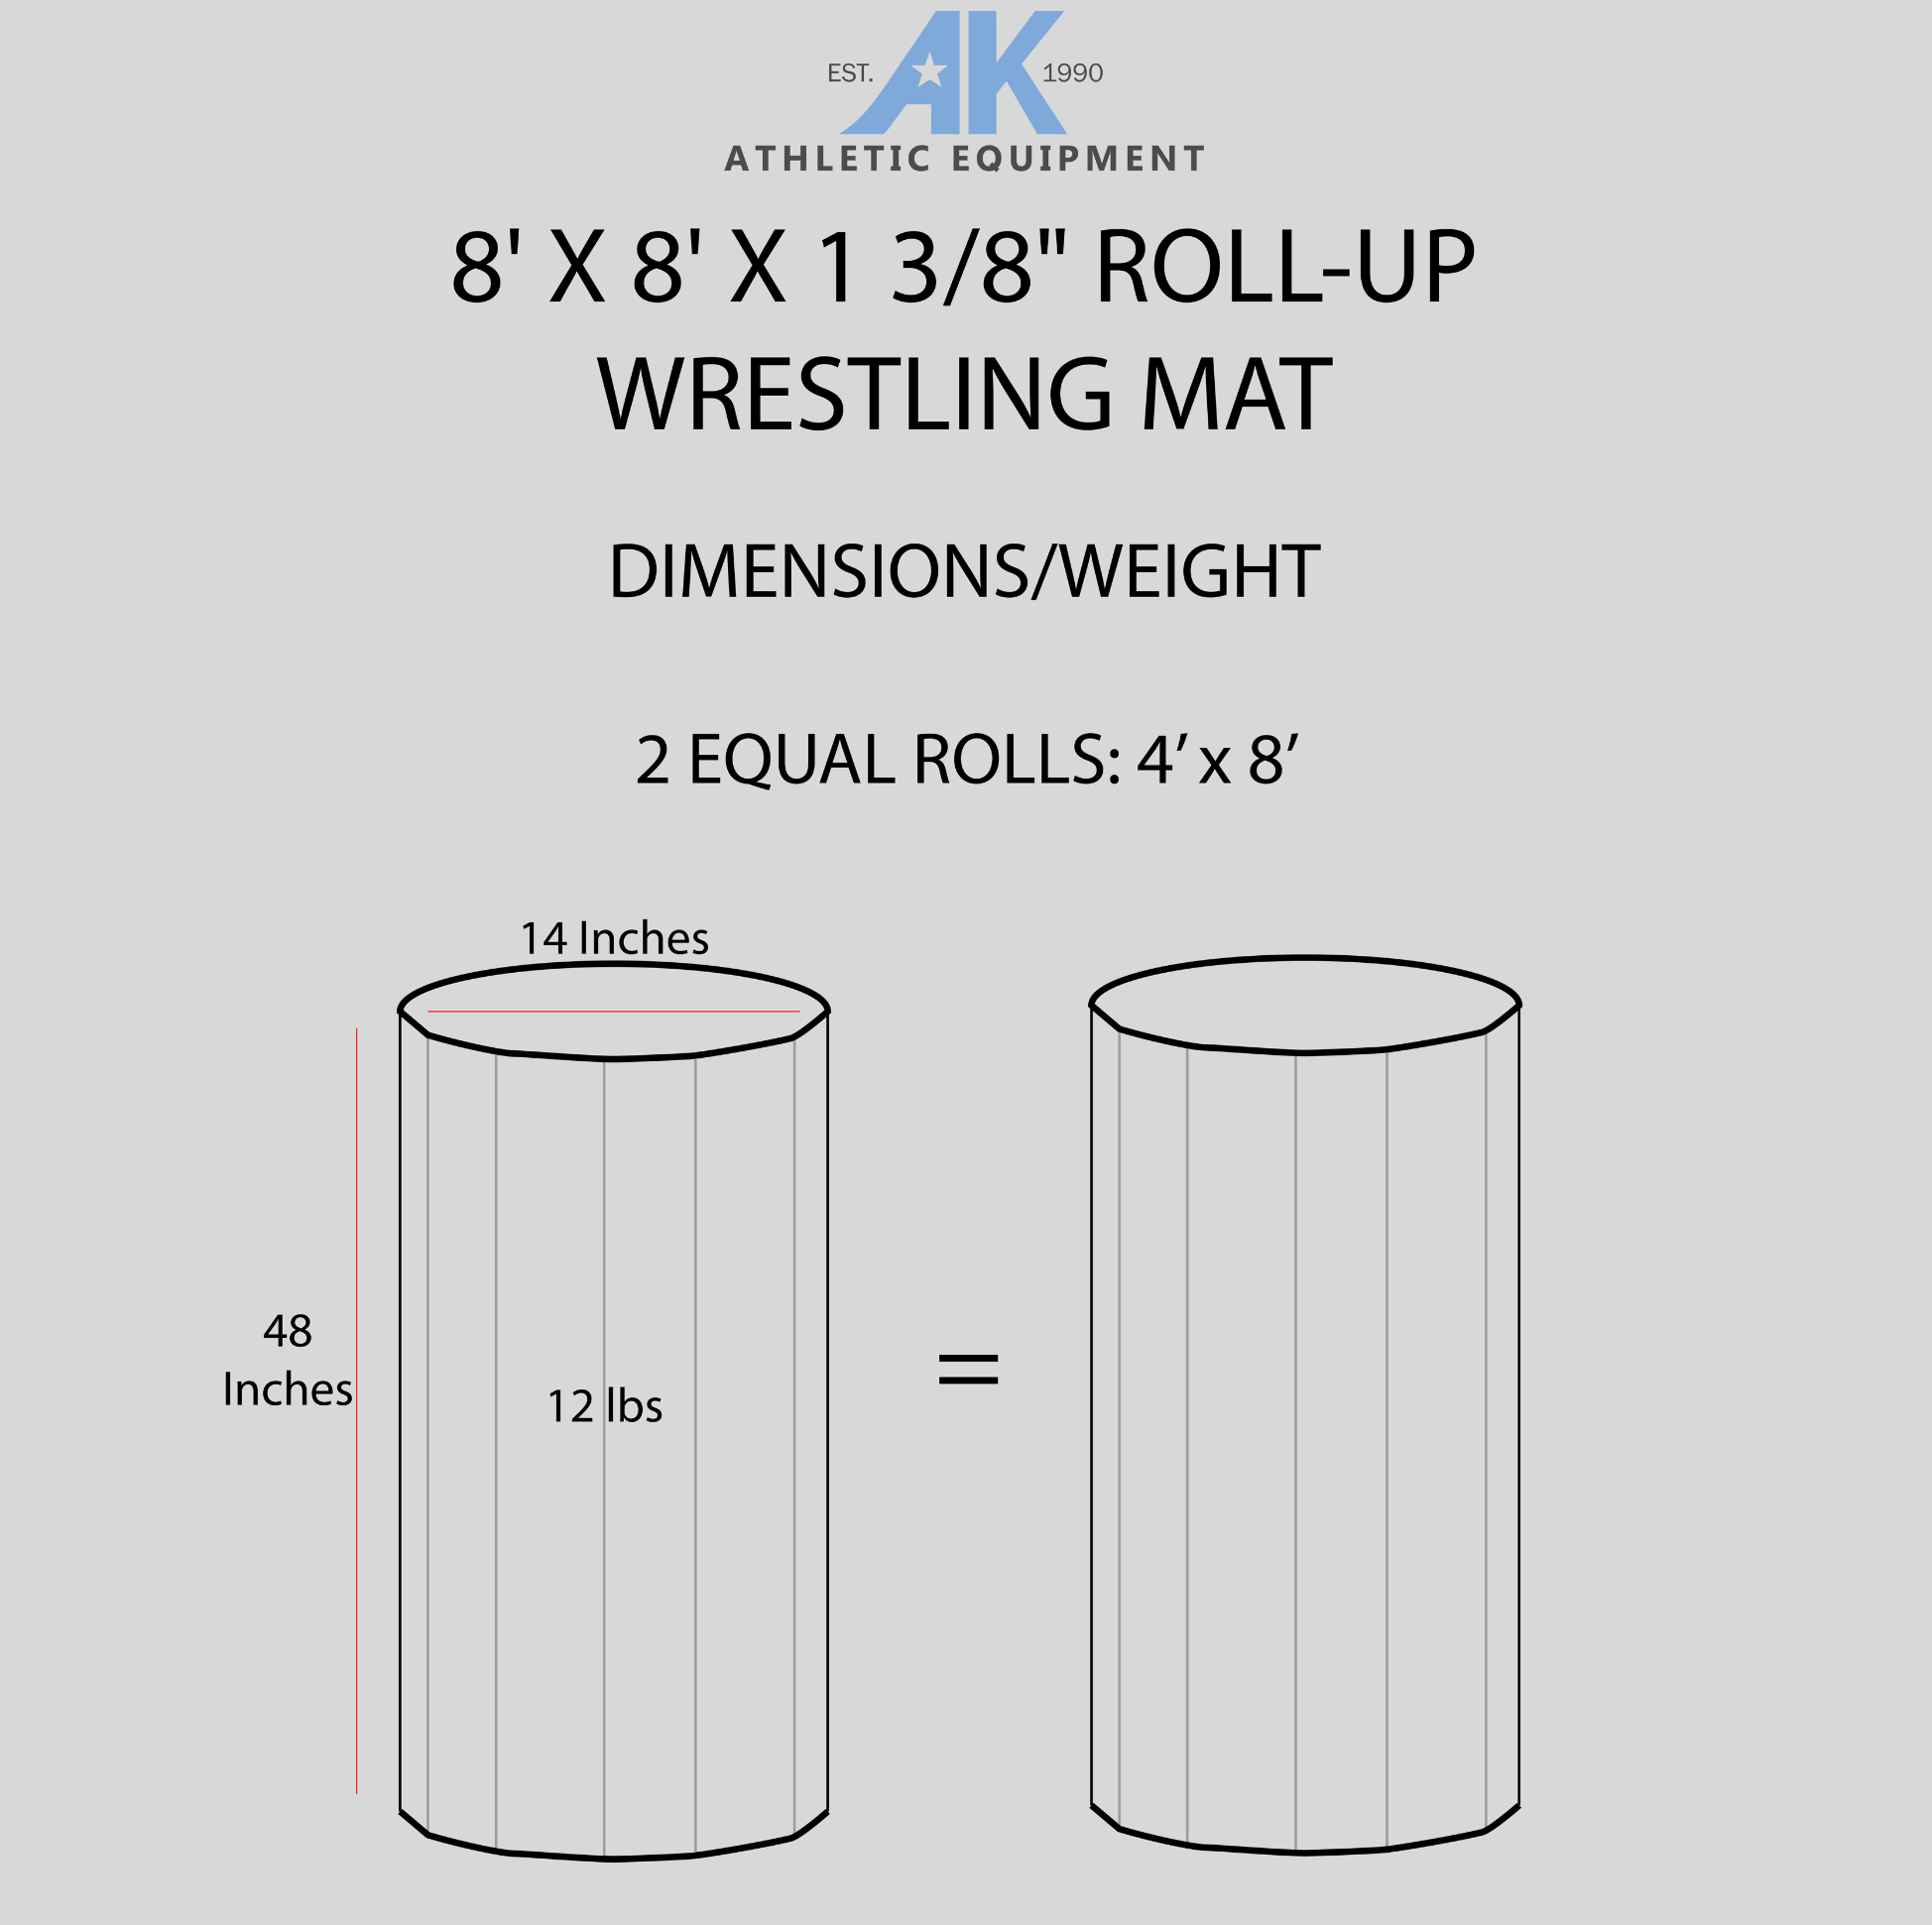 AK Athletics Roll Up wrestling mat storage dimensions. 8' x 8' wrestling/MMA mats are great for home gyms, personal fitness and MMA practice. 